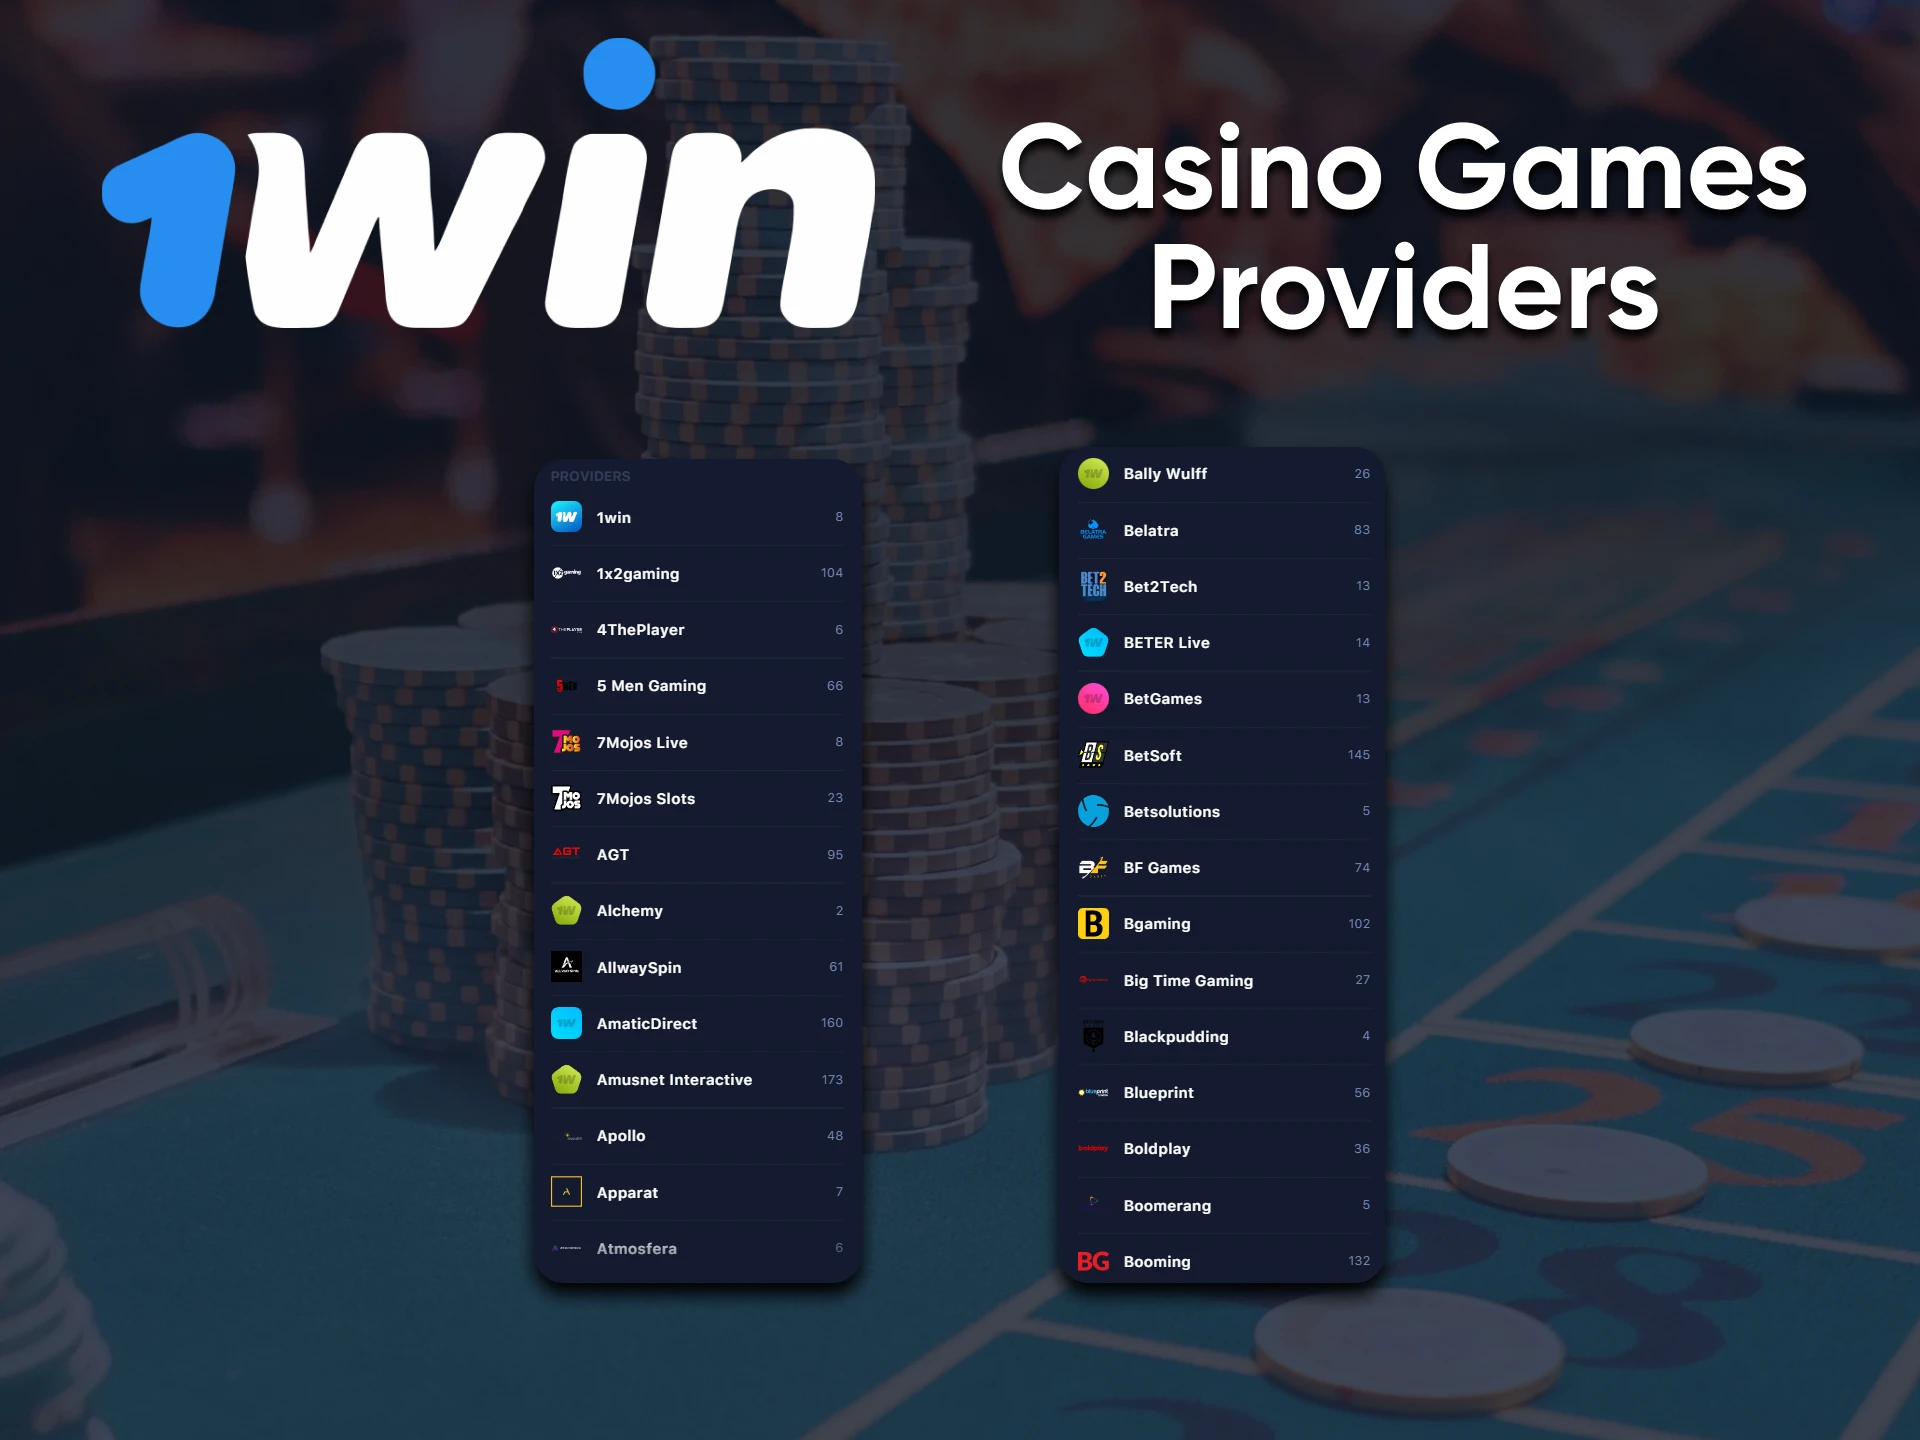 The 1win service uses only trusted casino game providers.